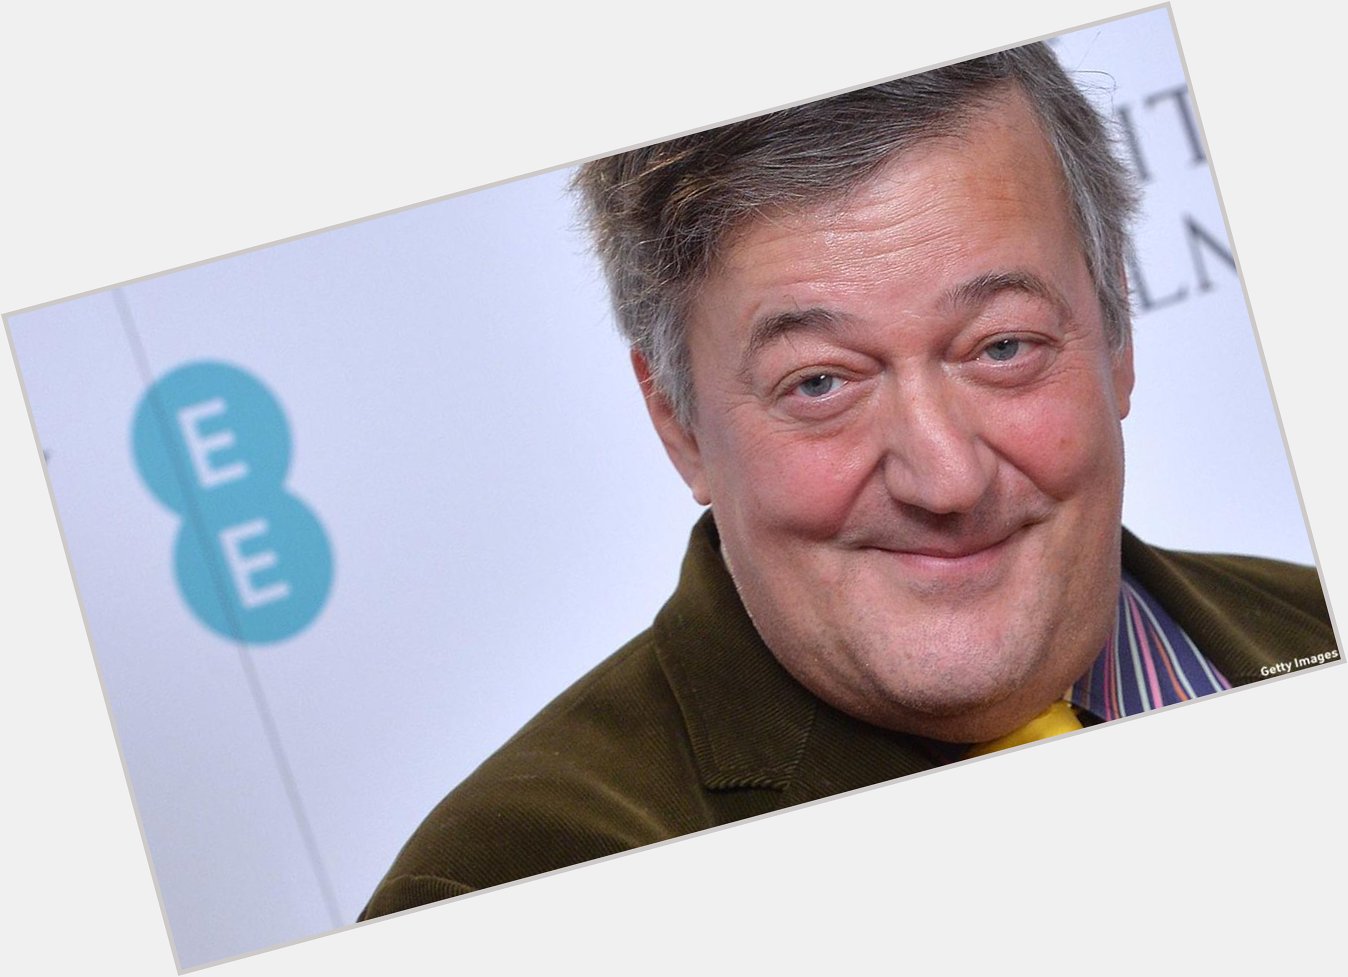 Stephen Fry turns 58 today -- happy birthday! Here he is throughout the years:  